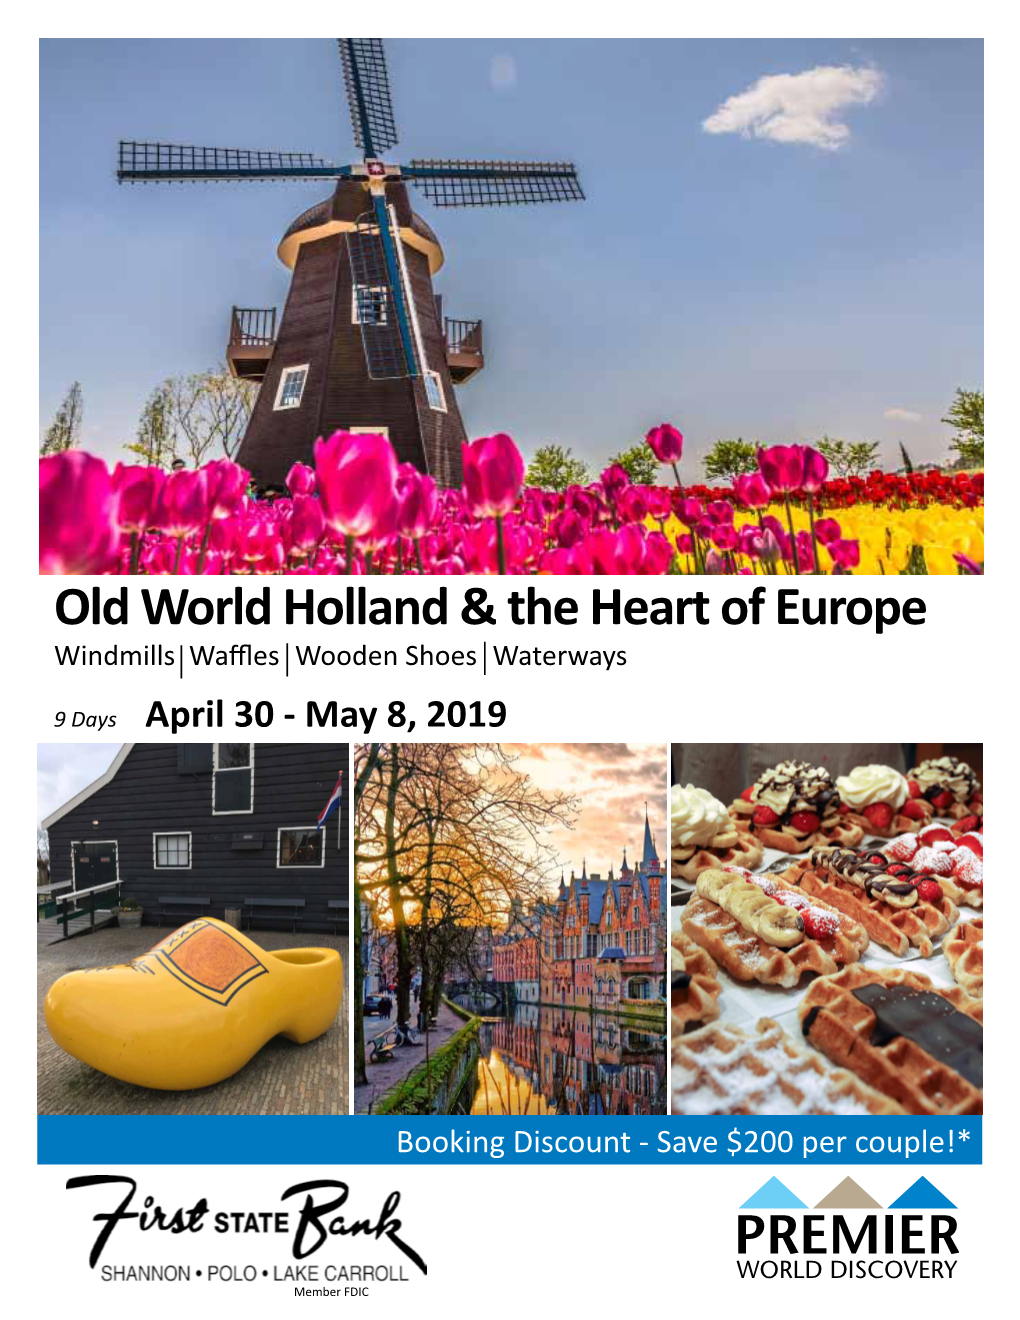 Old World Holland & the Heart of Europe